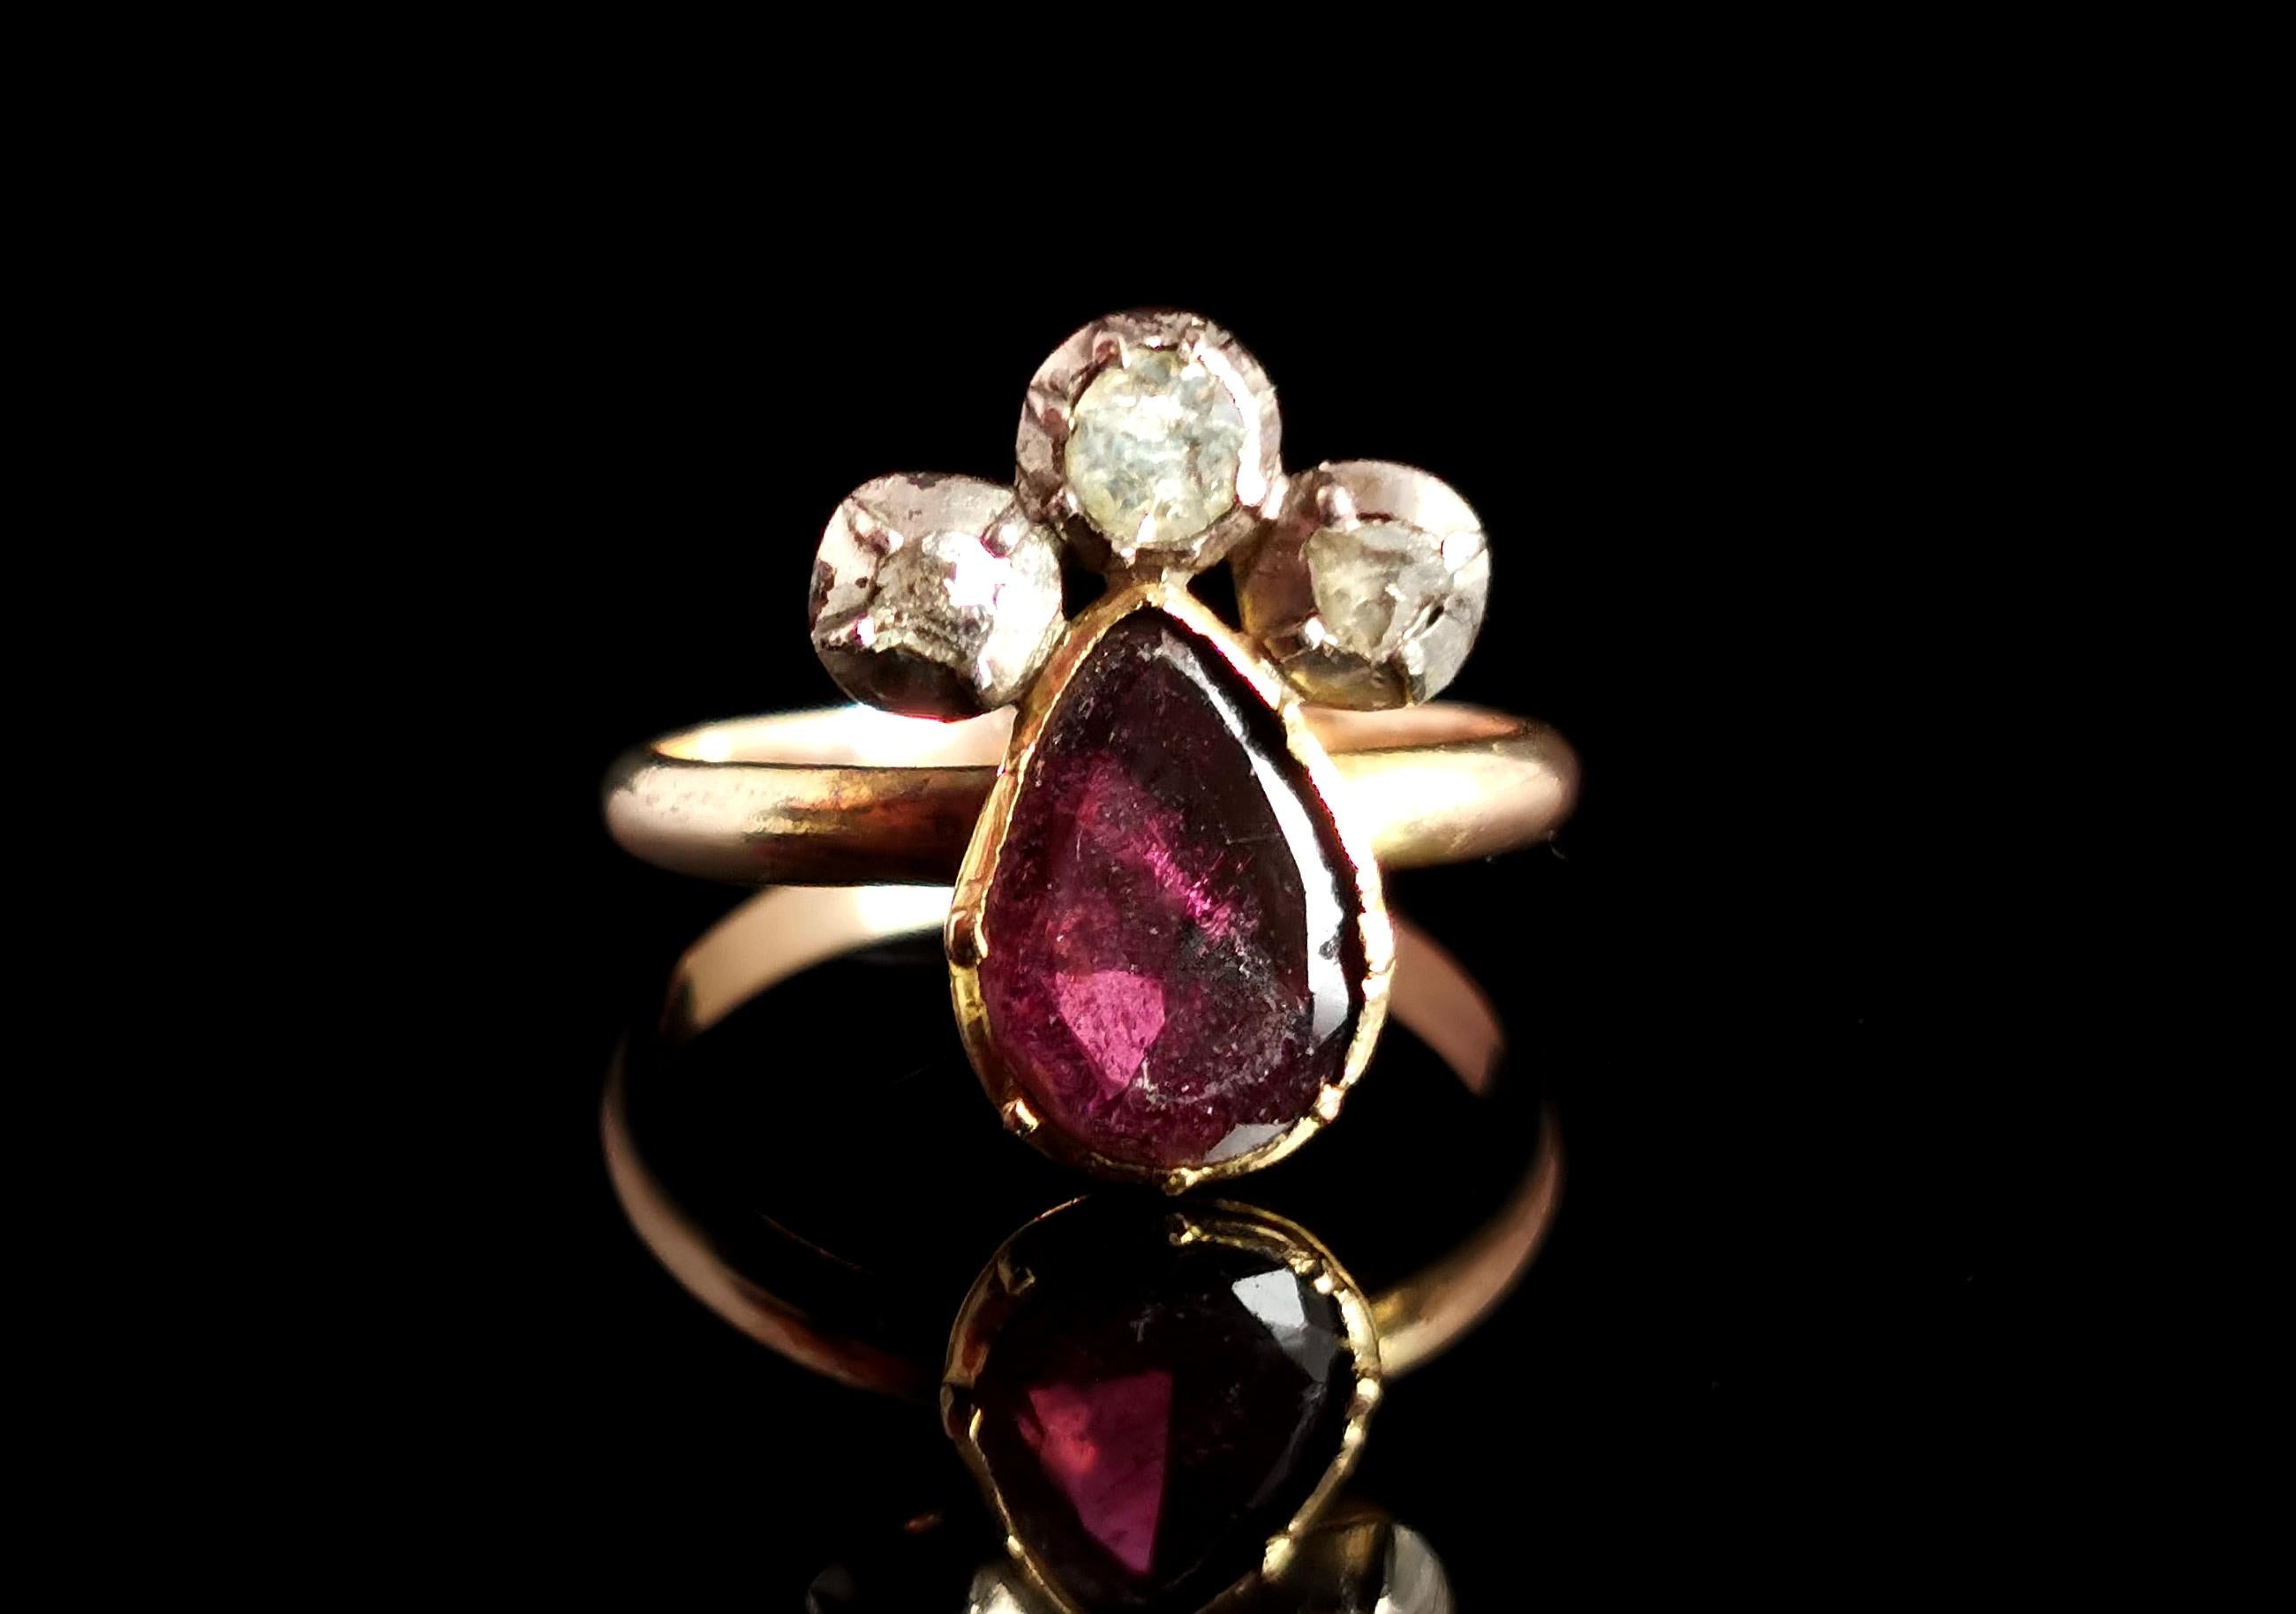 A beautiful, Georgian, late 18th century crowned heart ring.

It is made up of a pear shaped flat cut almandine garnet representing the heart and the crown is made up of pretty Rose cut diamonds collet set into silver.

I love the mysterious and